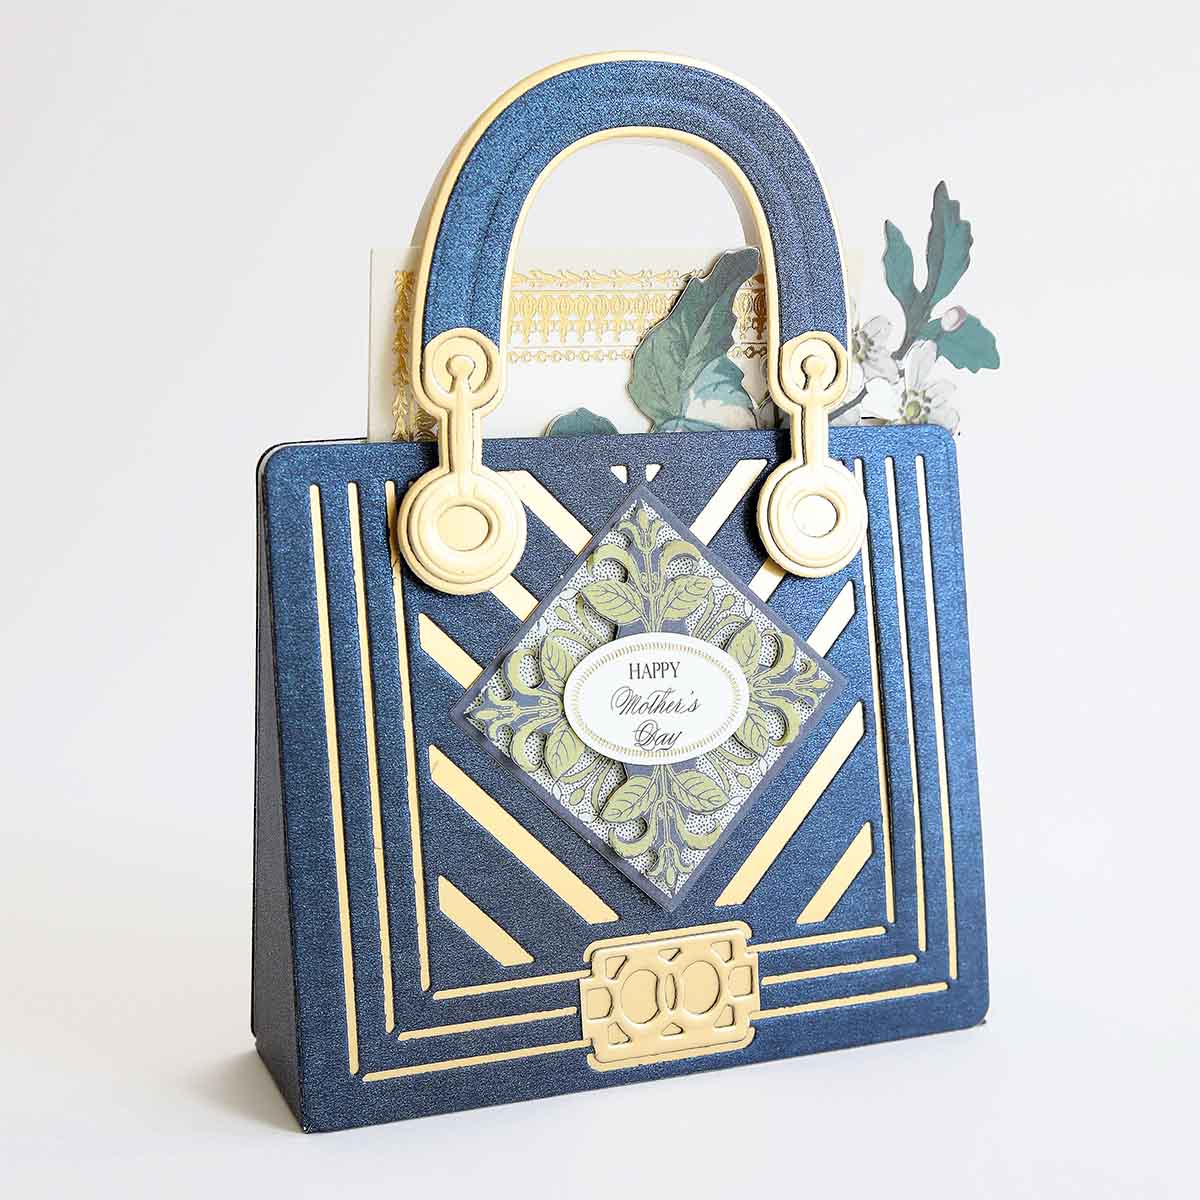 a blue and gold purse with a picture of a woman's face on it.